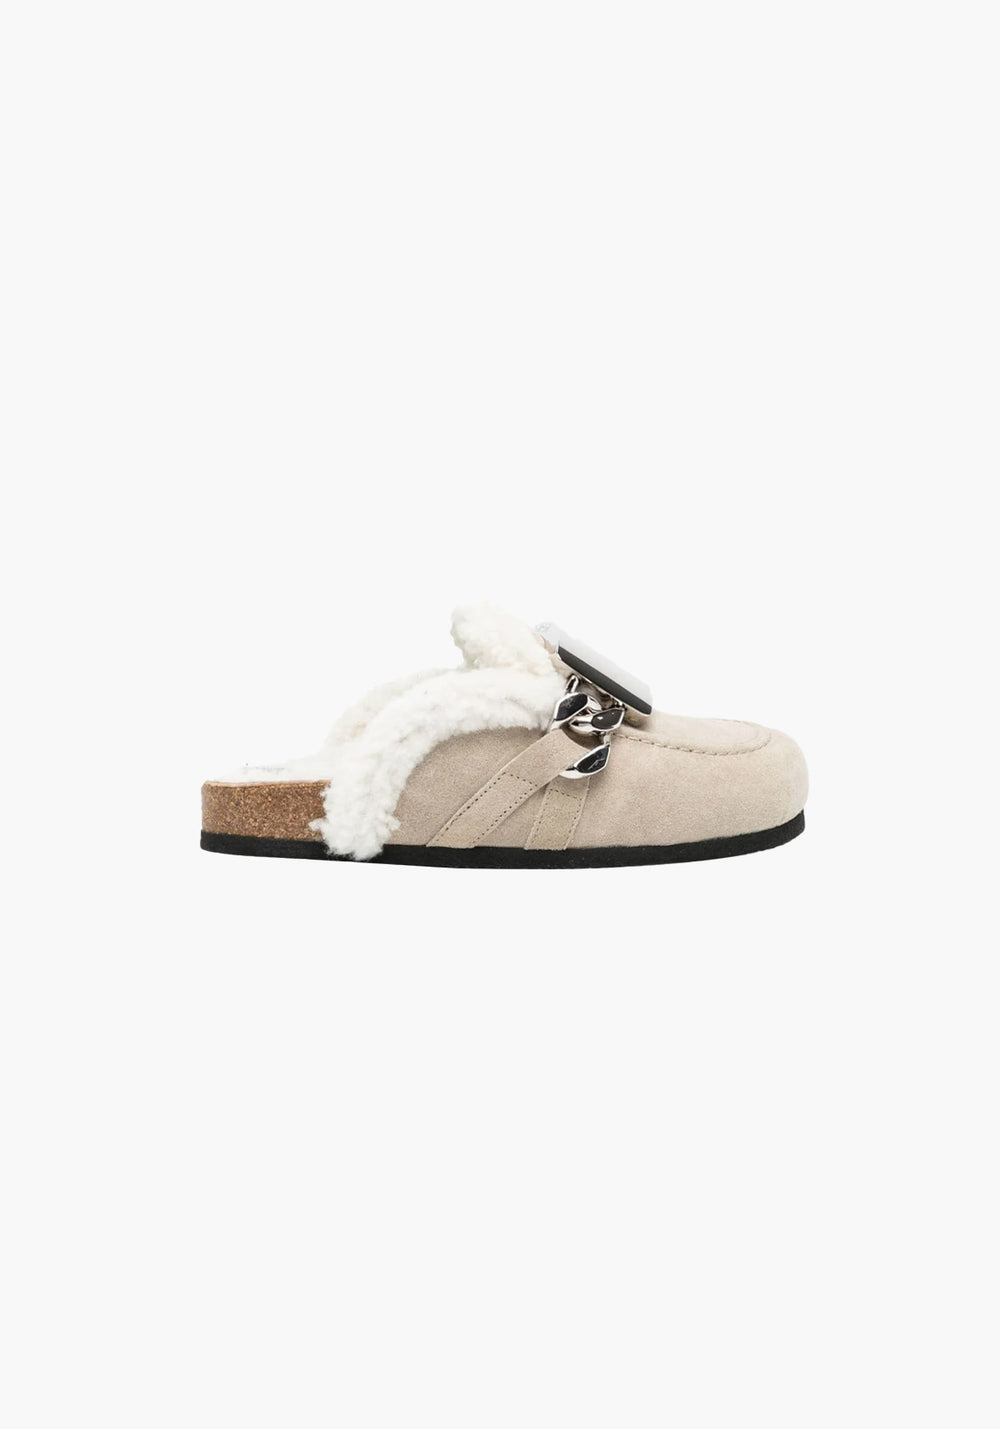 SHEARLING GOURMET LOAFER